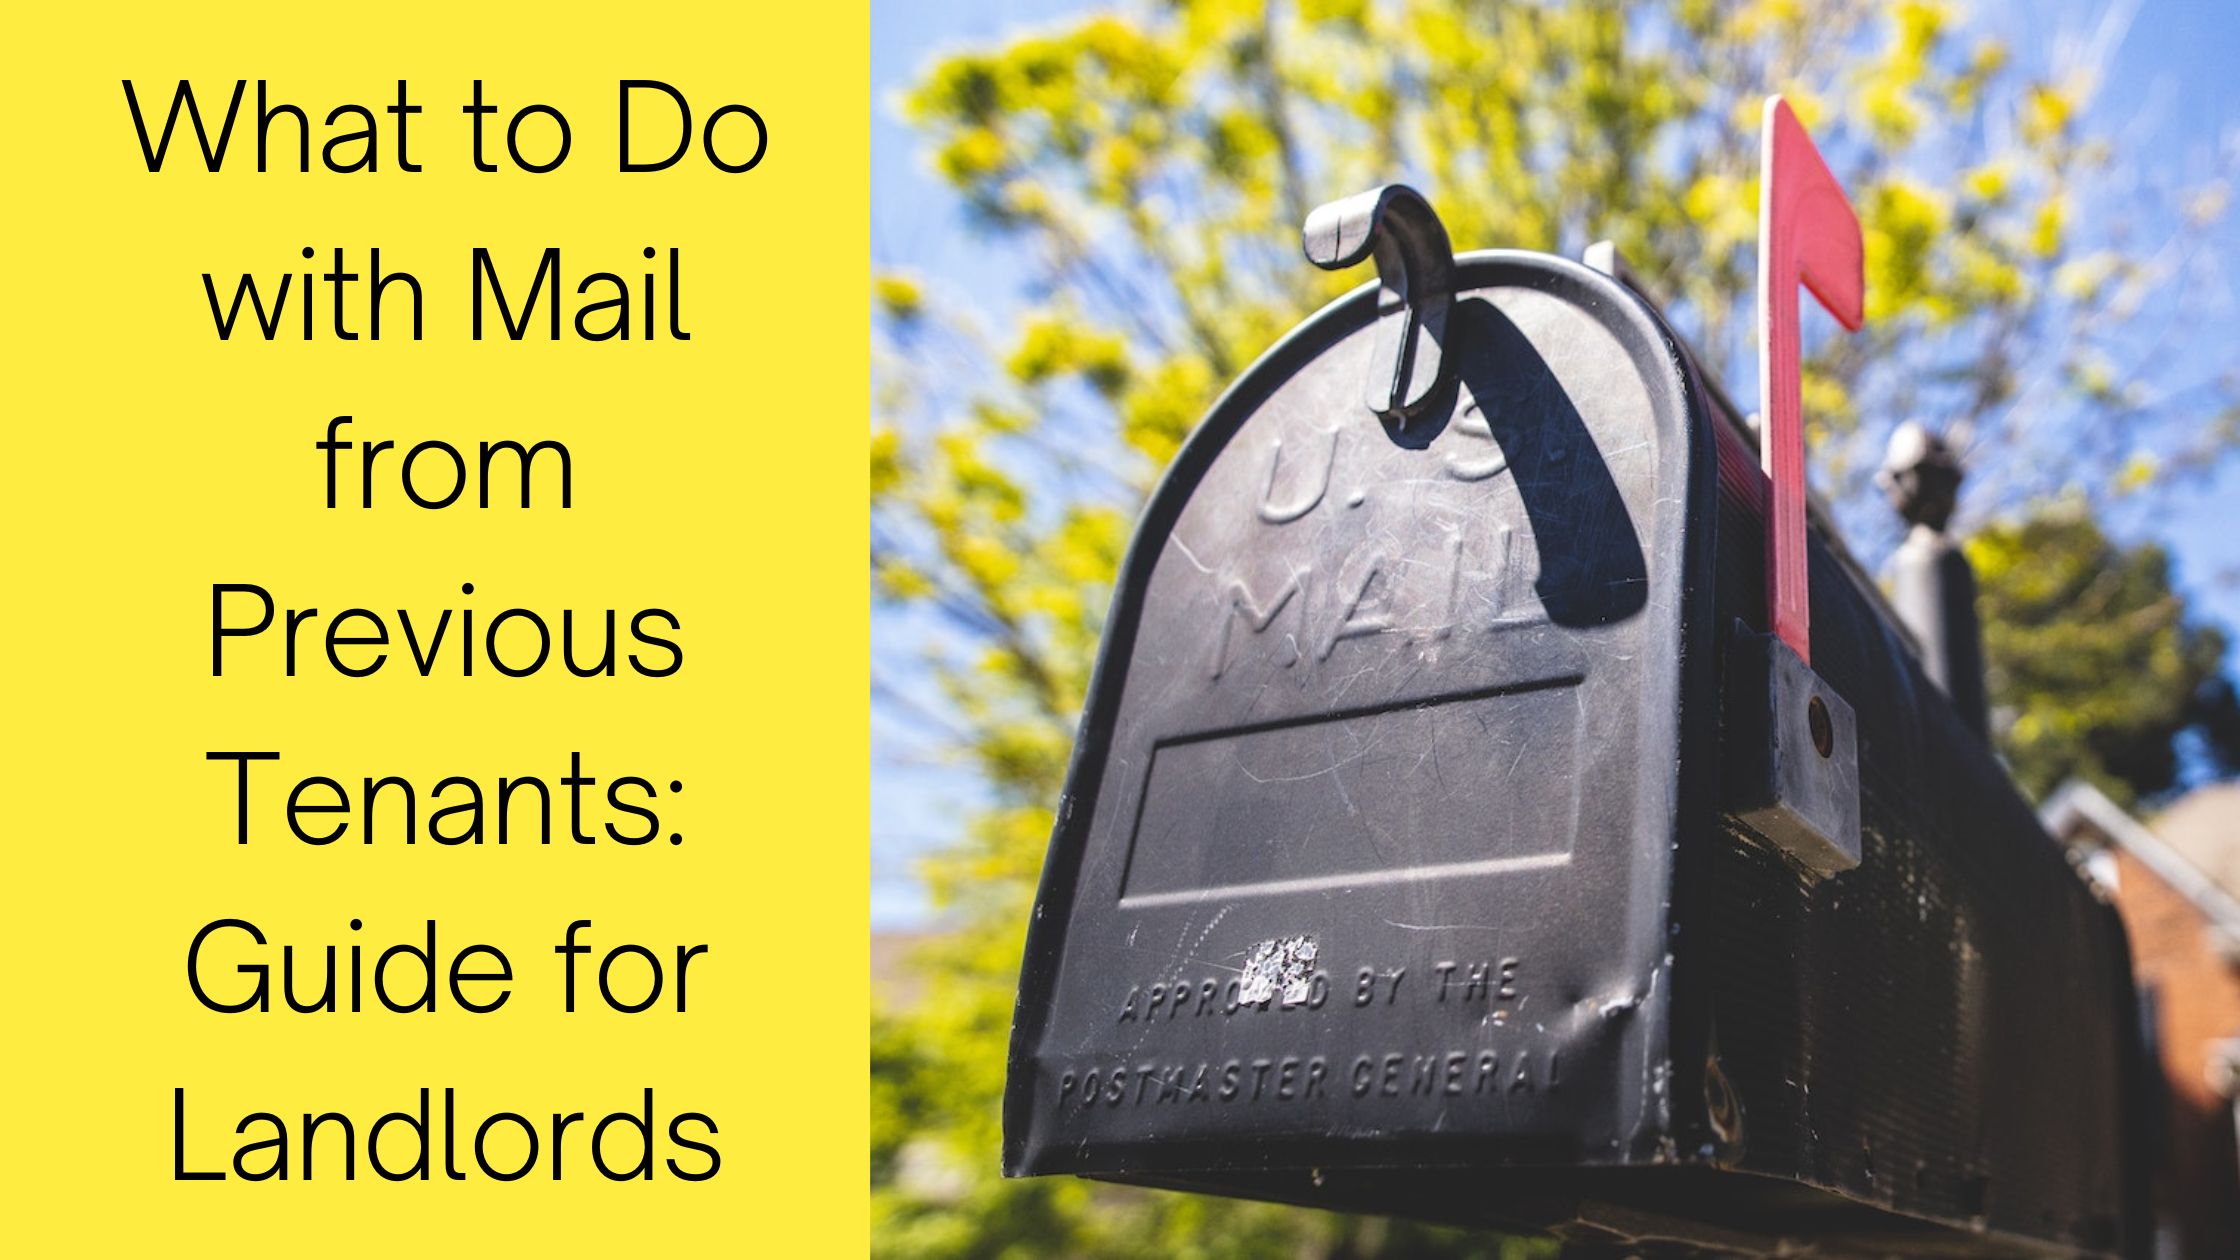 What to Do with Mail from Previous Tenants: Guide for Landlords